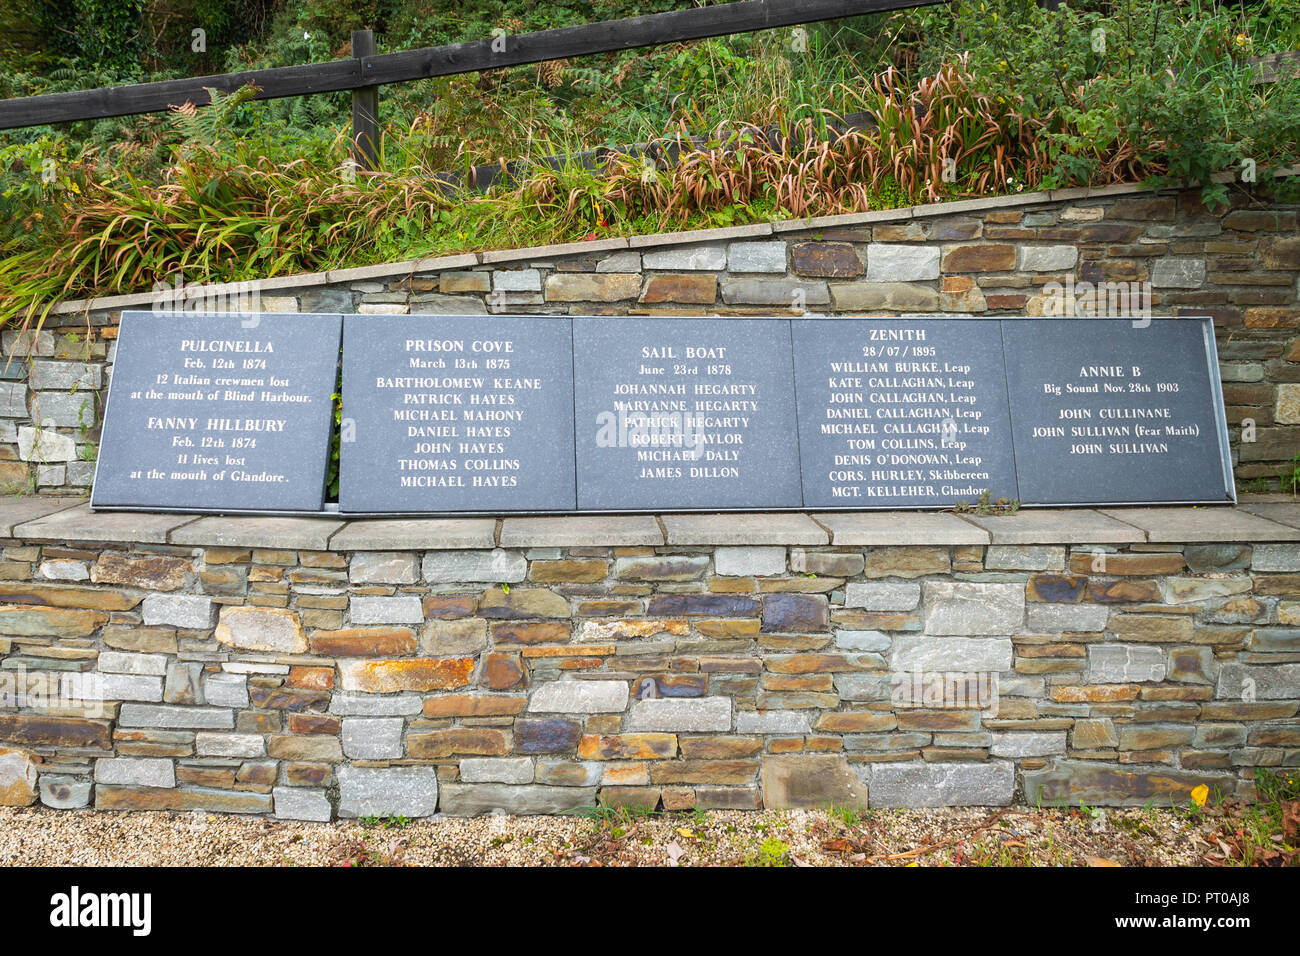 remembrance monument dedicated to fisherman and seaman lost at sea union hall west cork ireland Stock Photo